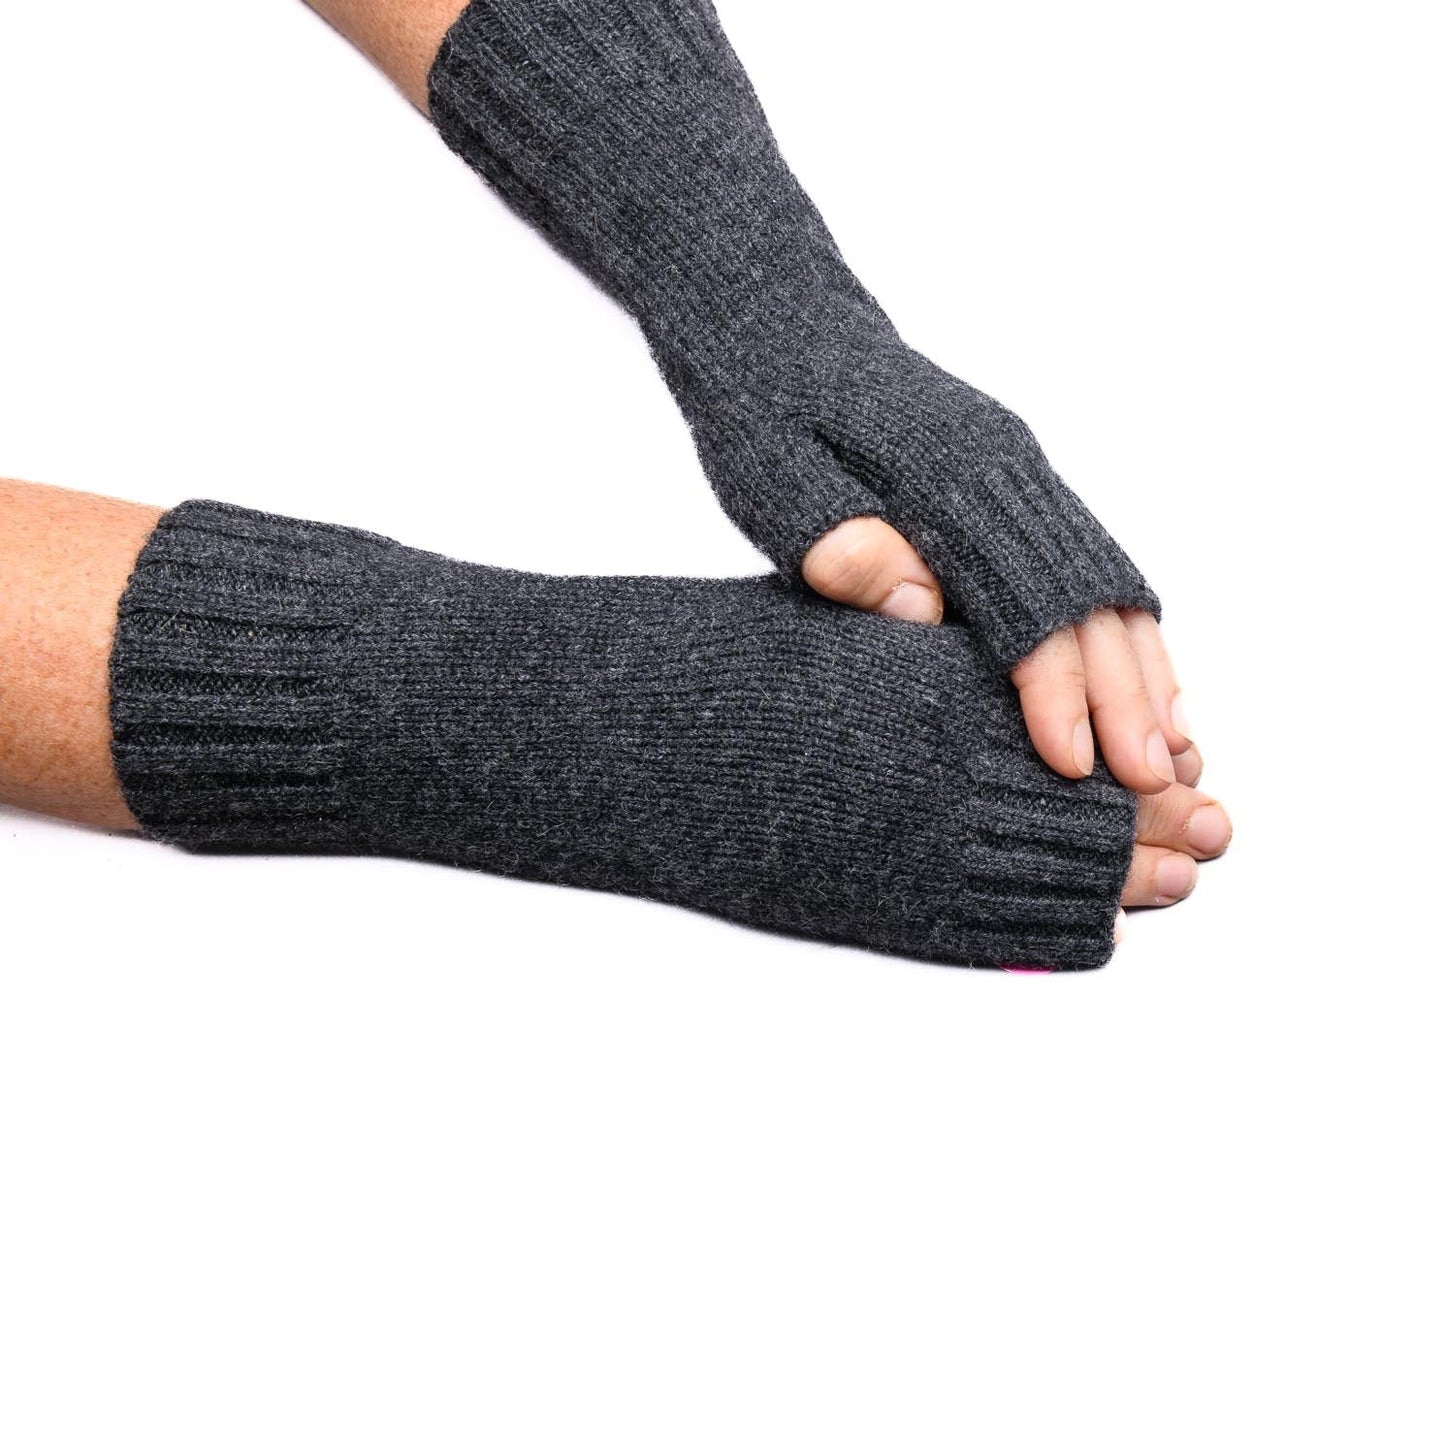 Gotta Hand it to YOU 100% Pure Cashmere Fingerless Glove, Racy